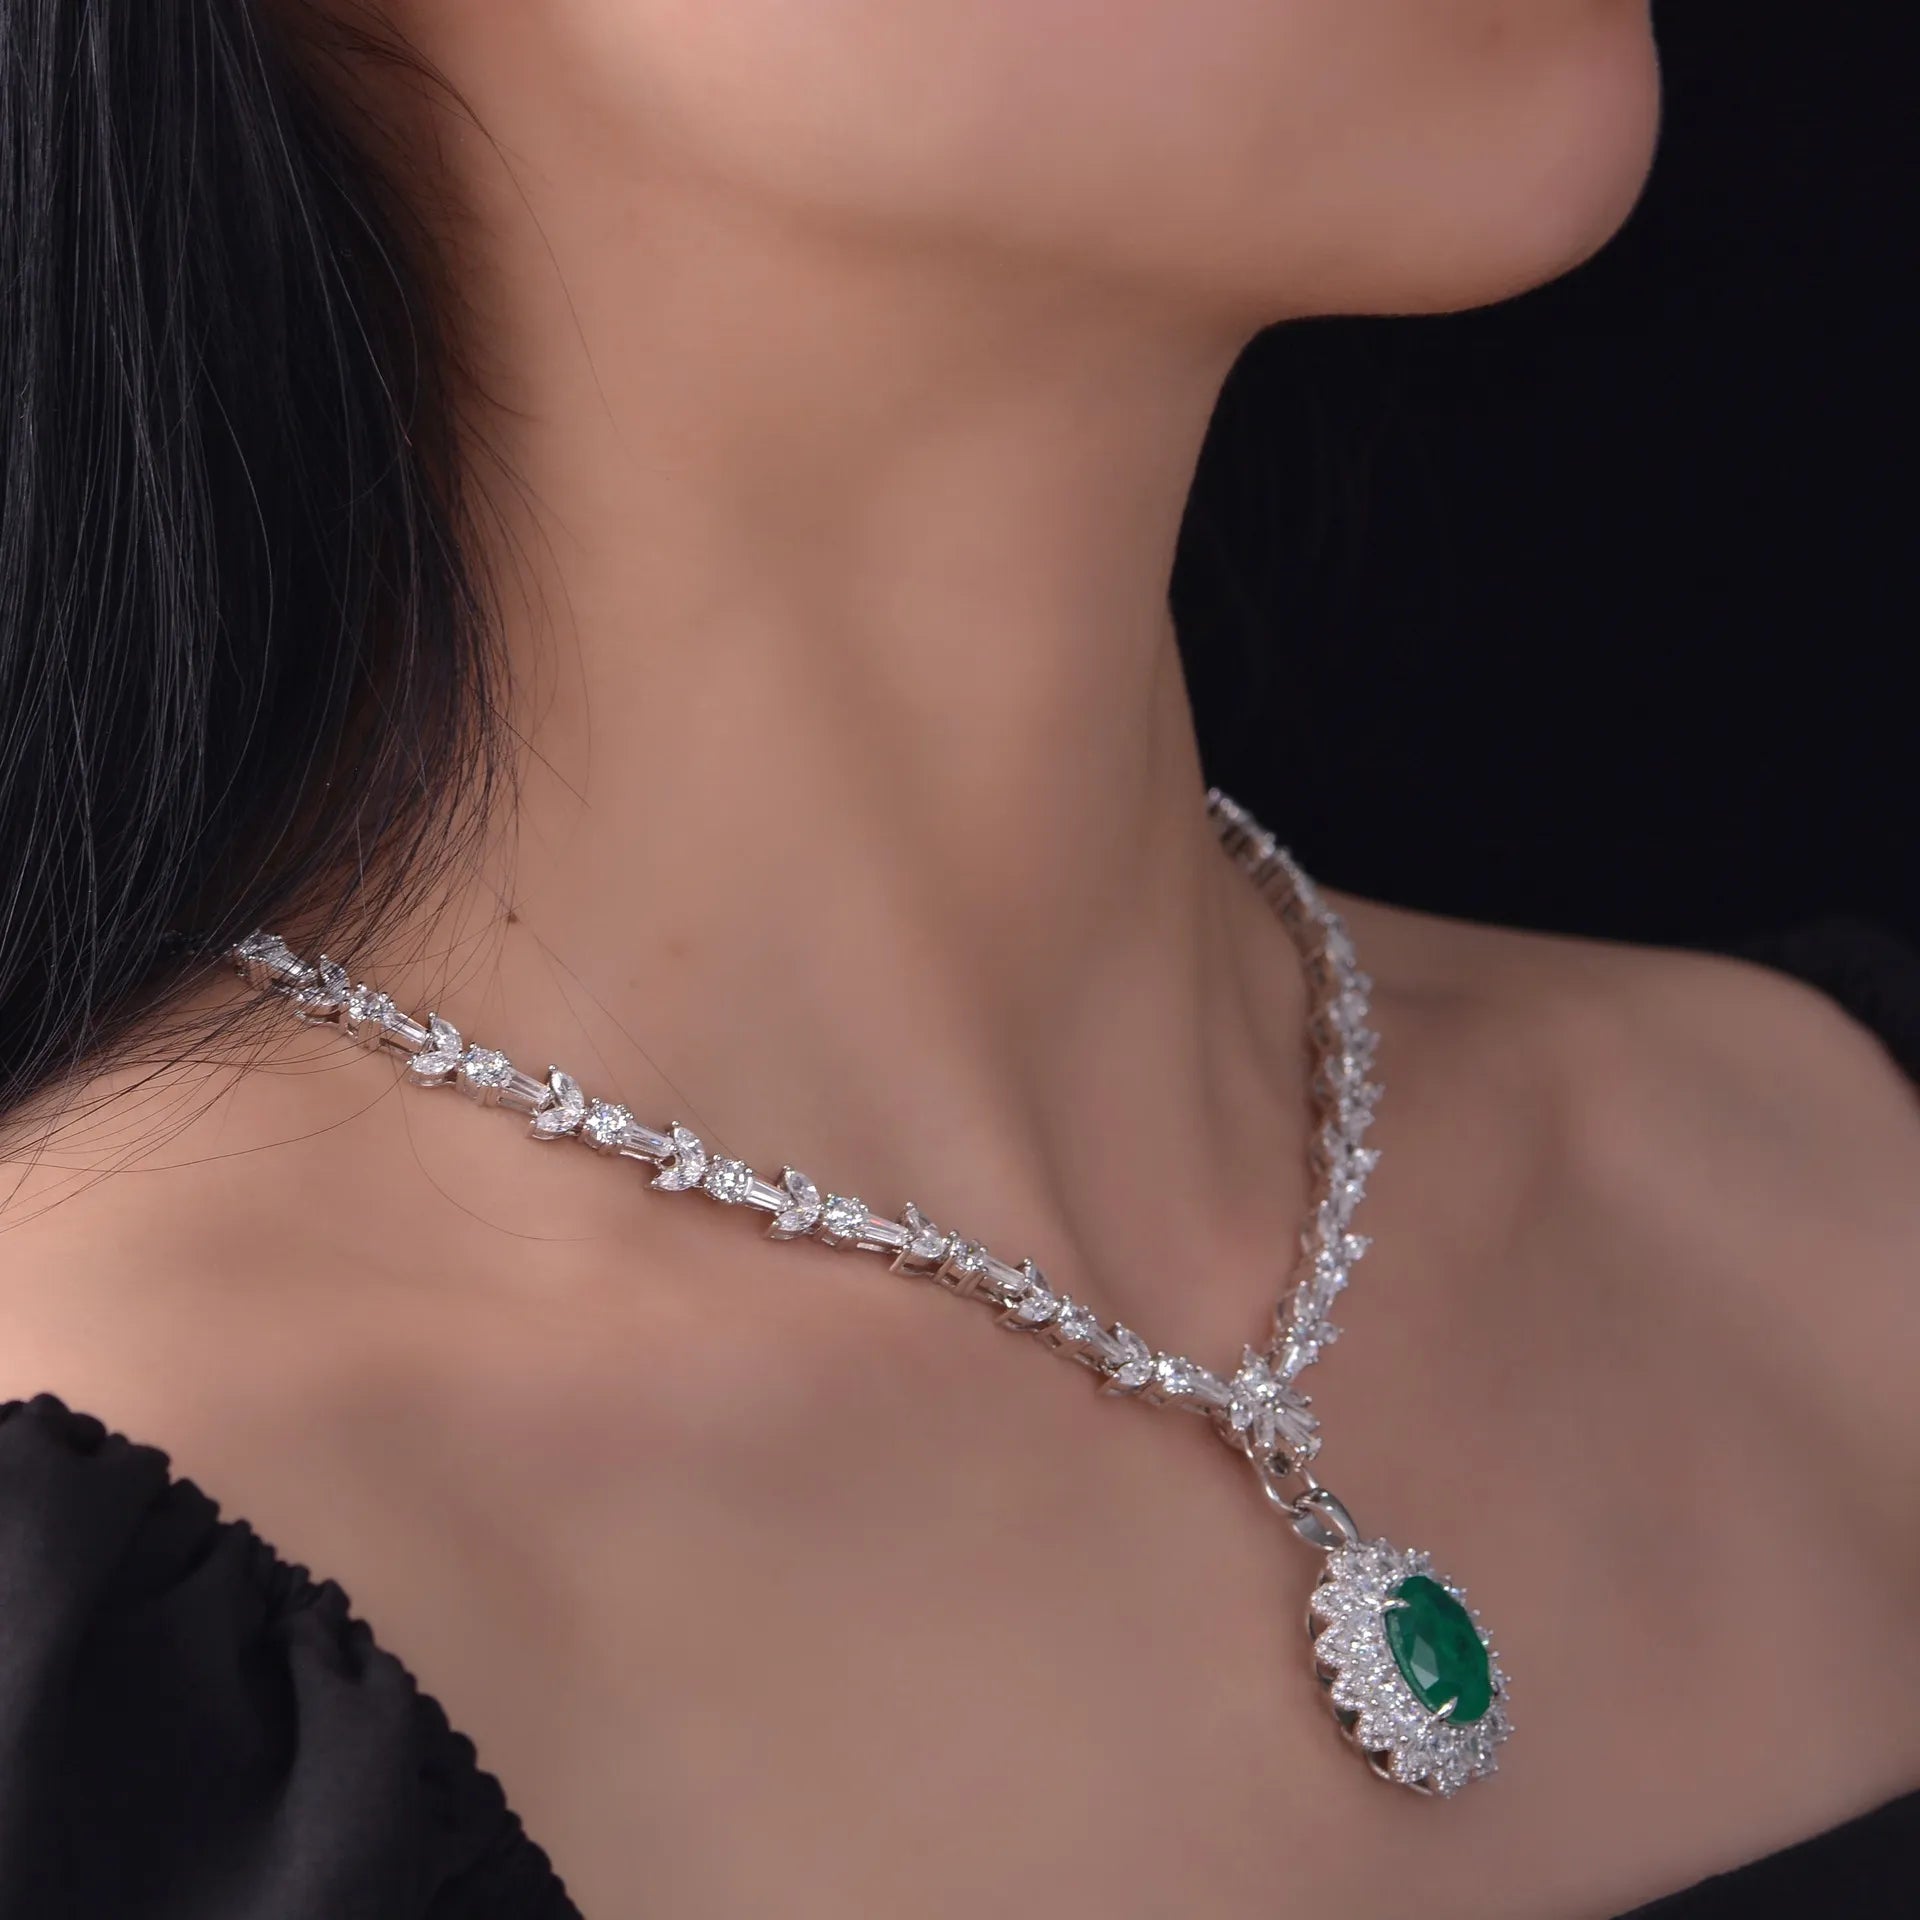 7.5 Carat Oval Cut Imitation Emerald and Cubic Zirconia Royal Inspired Necklace in Platinum-Plated Sterling Silver - Boutique Pavè